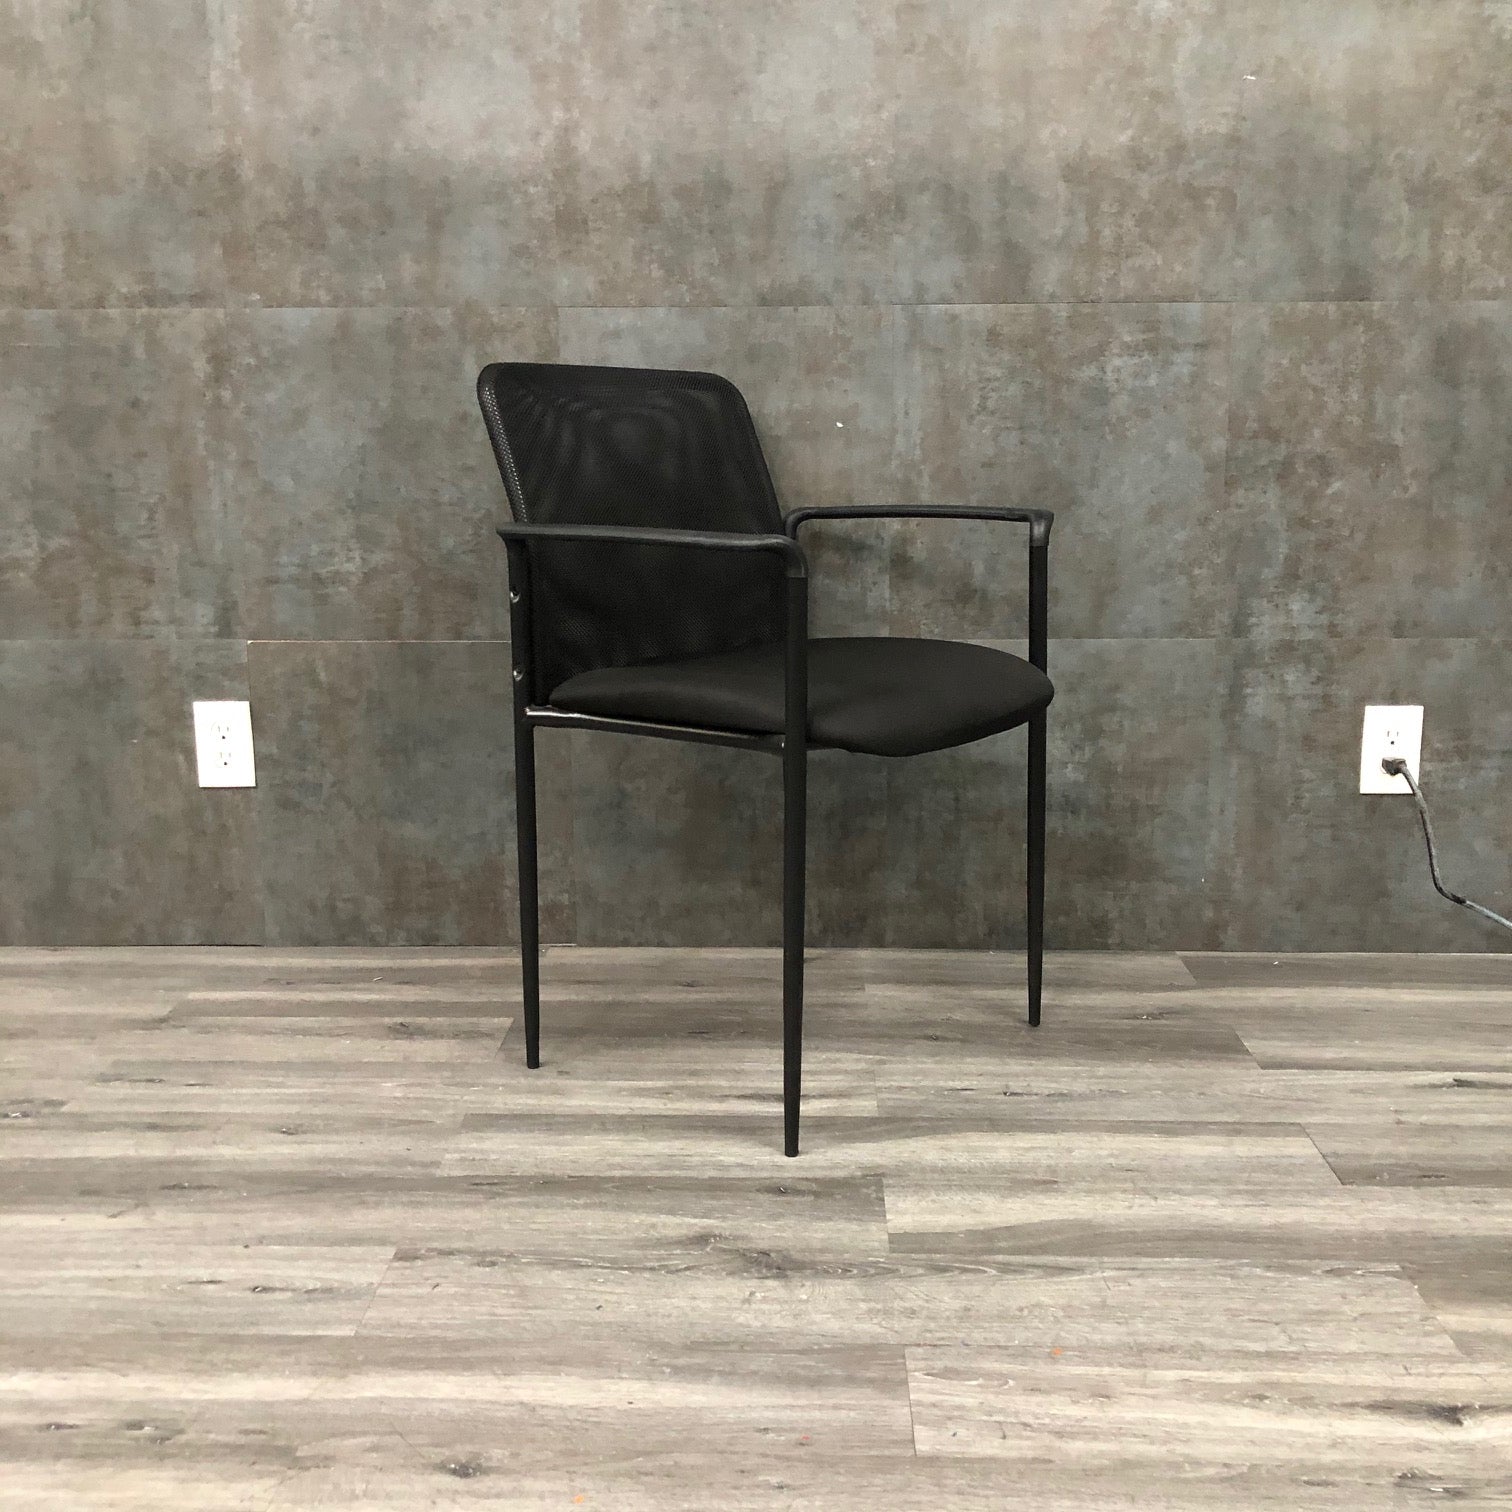 Angelus Guest Waiting Room Chair